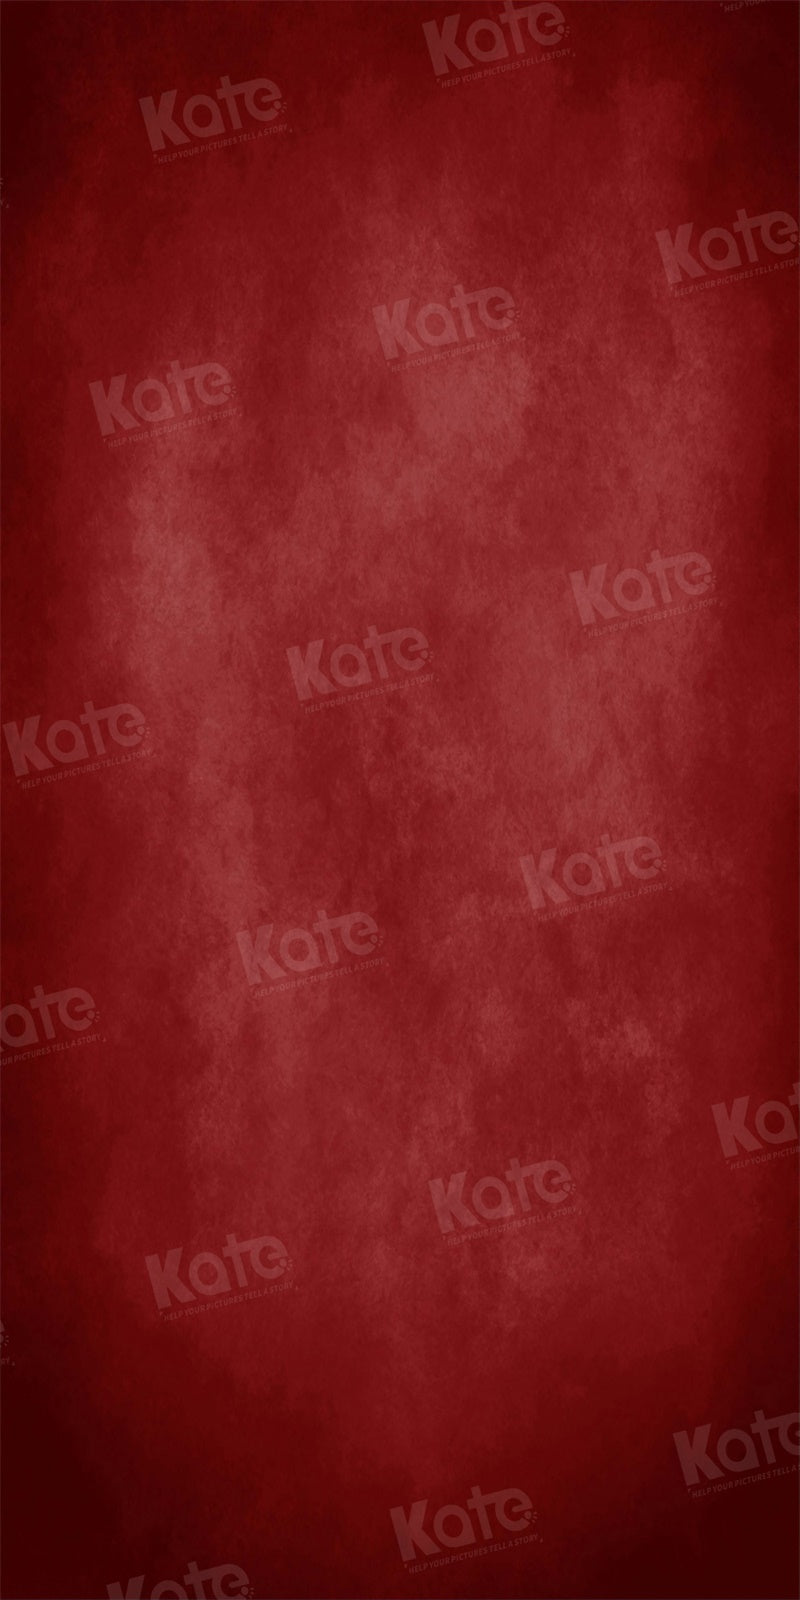 Kate Abstract Backdrop Red Texture for Portrait Photography